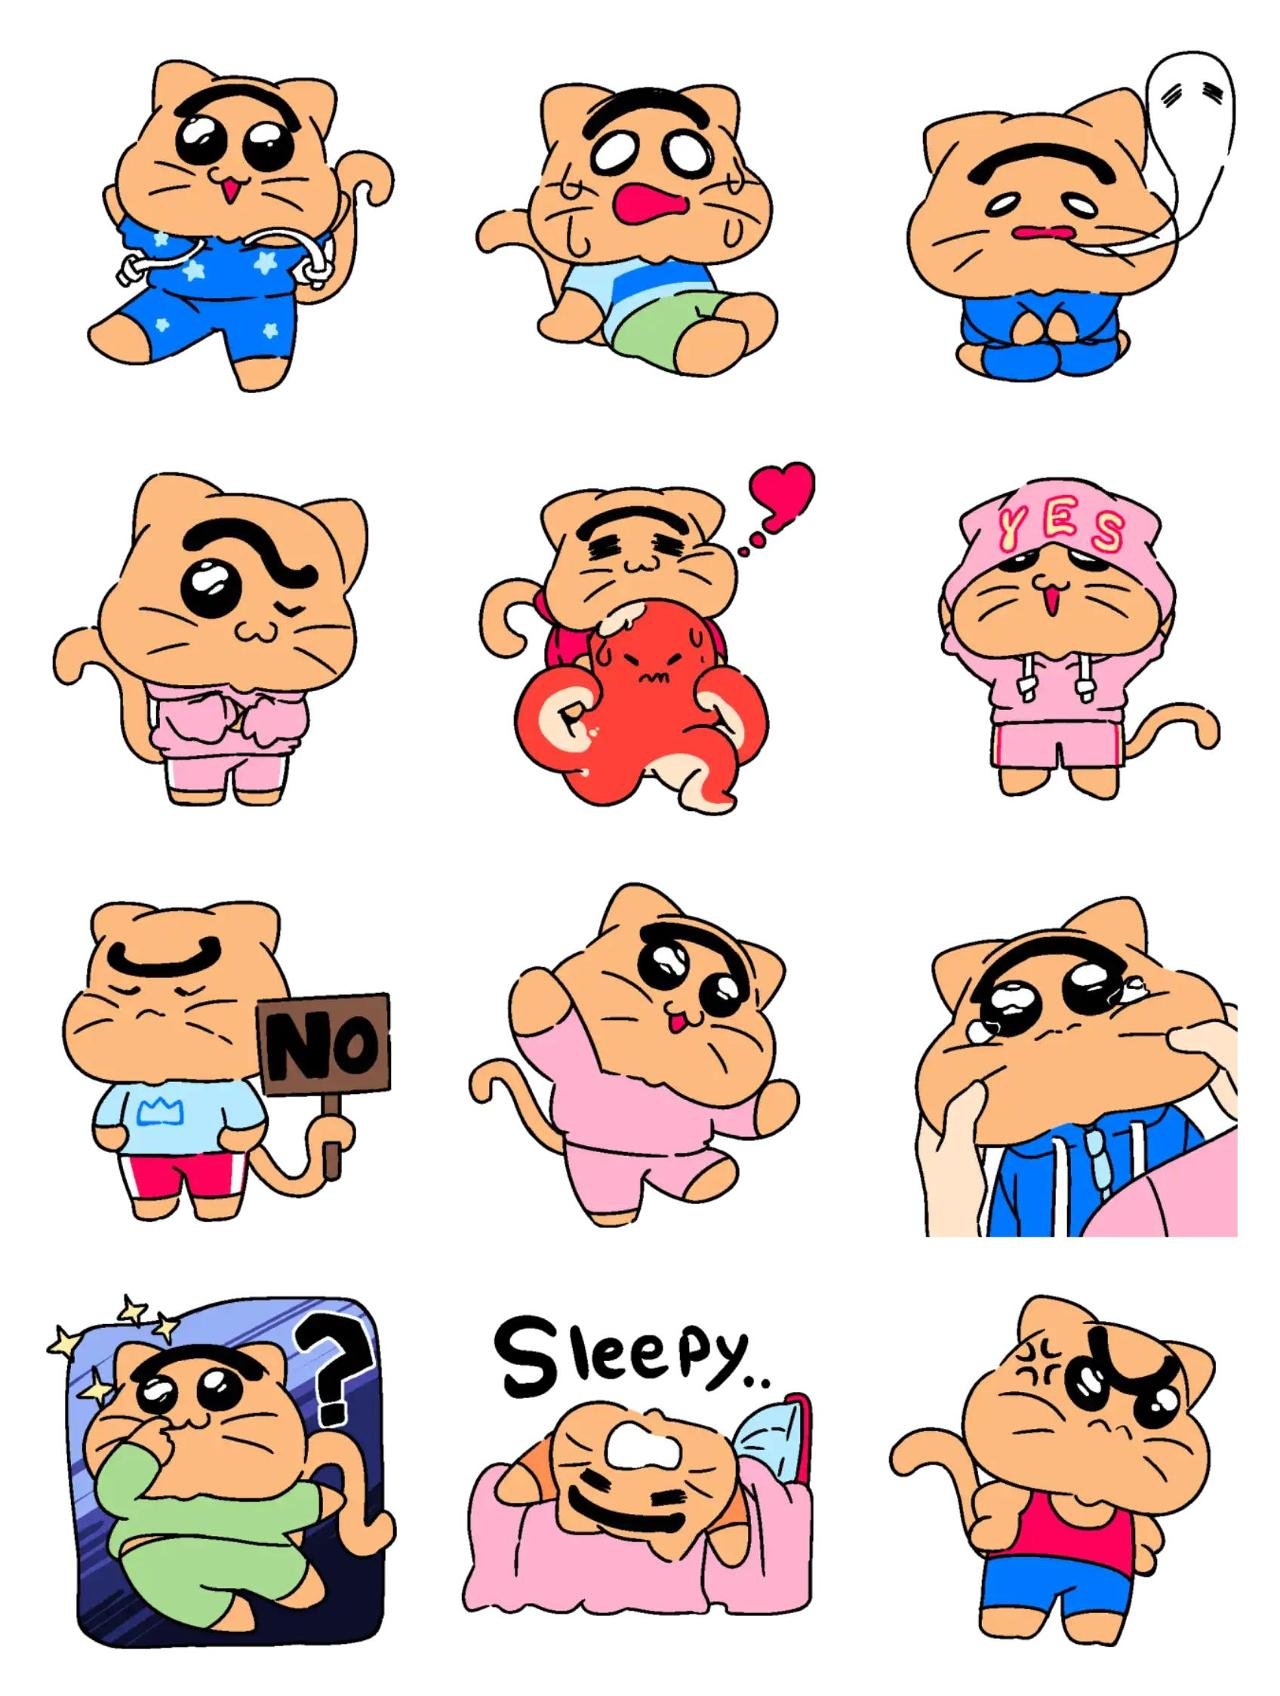 Blondy's cute reactions Animation/Cartoon,Animals sticker pack for Whatsapp, Telegram, Signal, and others chatting and message apps